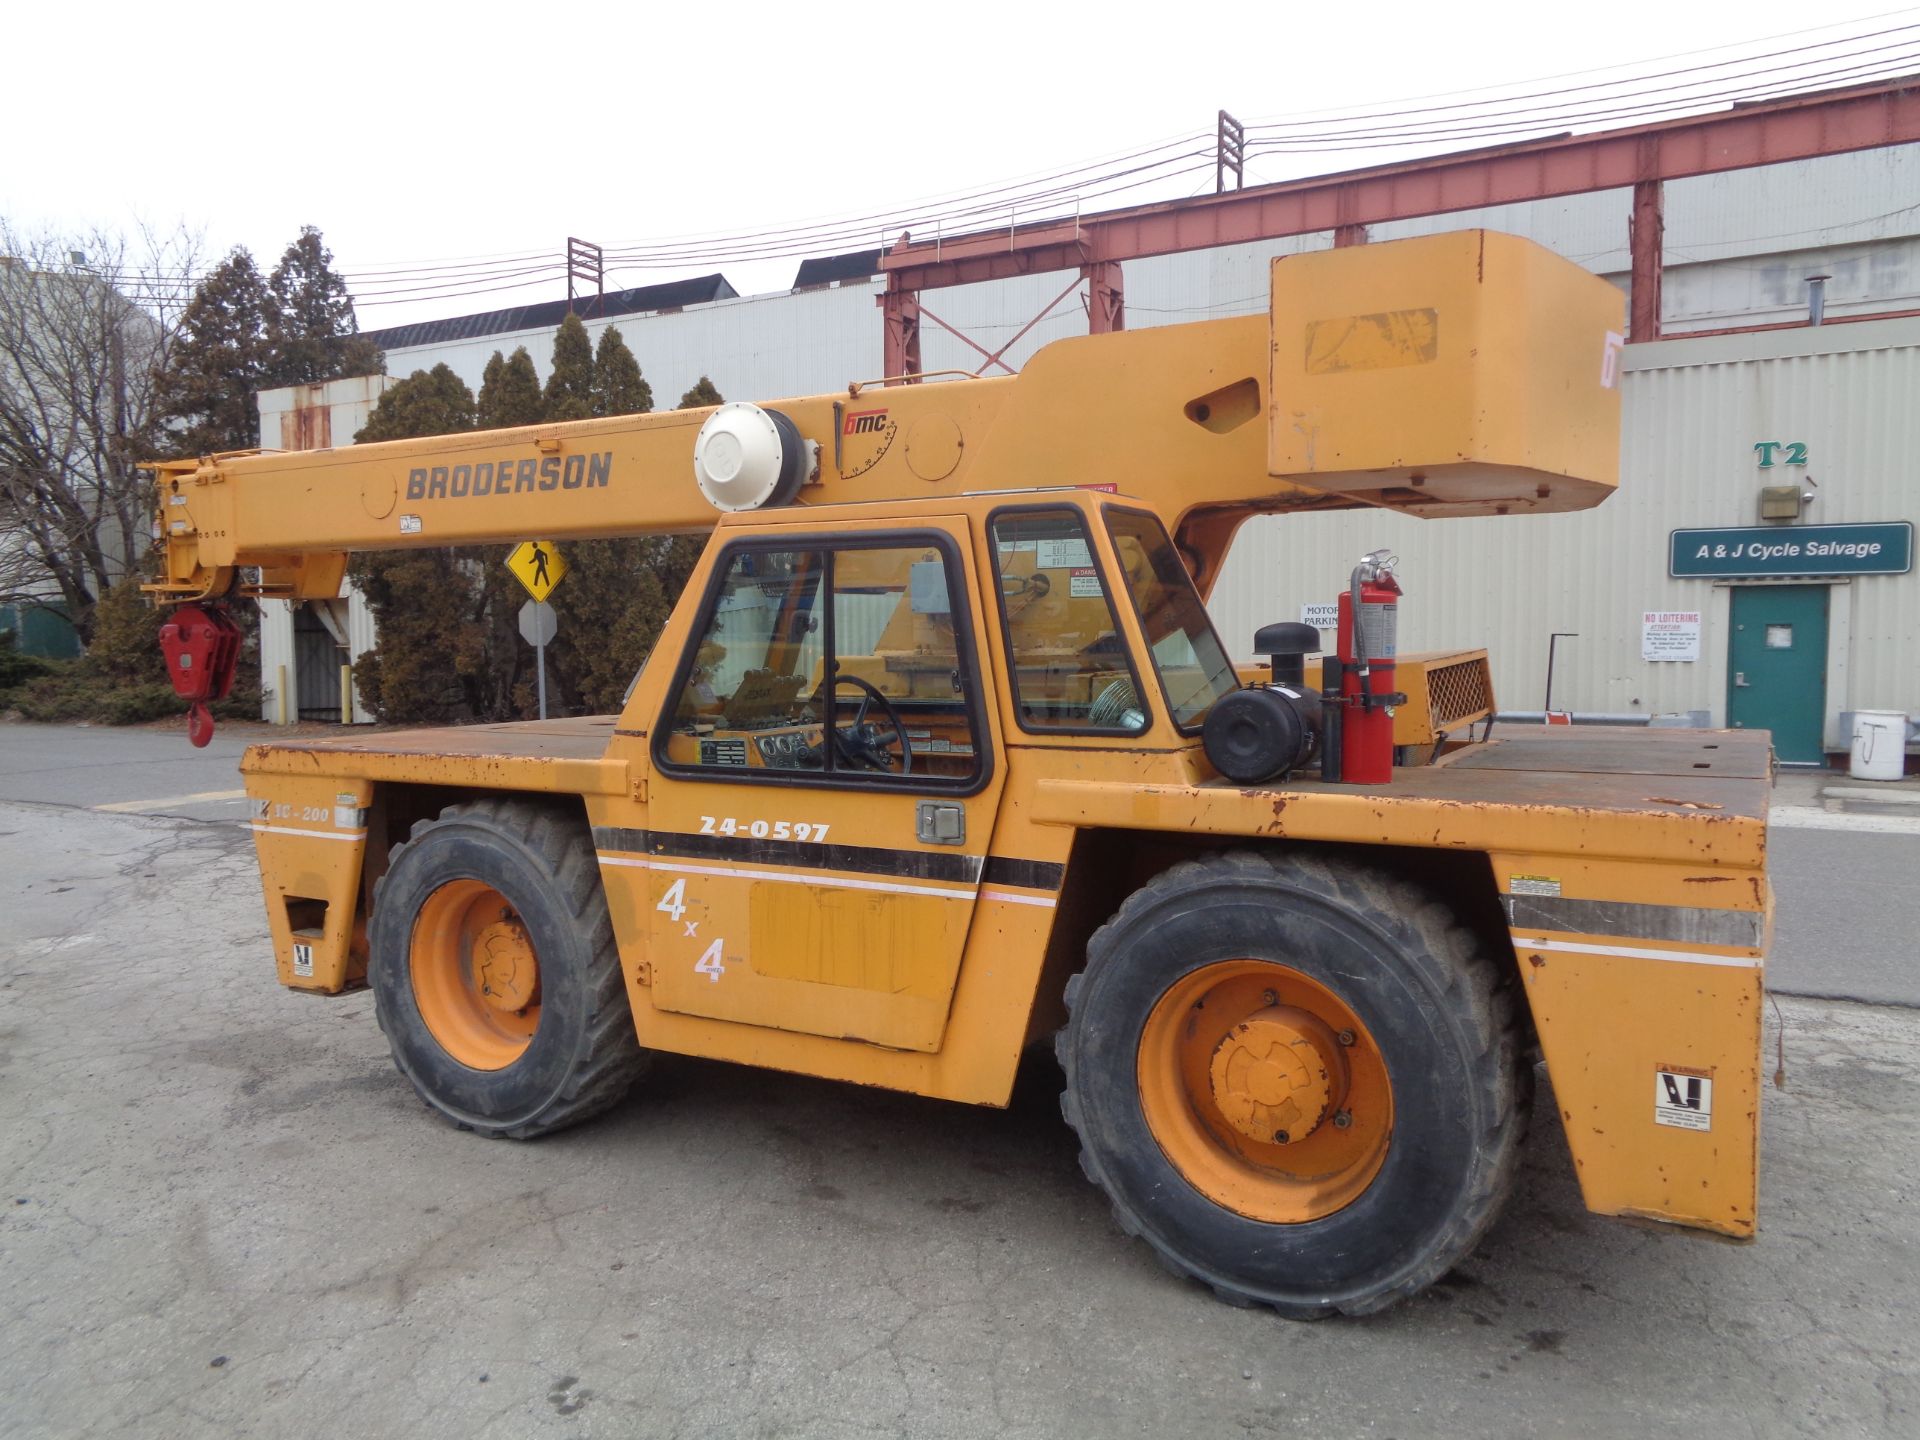 2005 Broderson IC200 2F 30,000lb Carry Deck Crane - Image 4 of 21